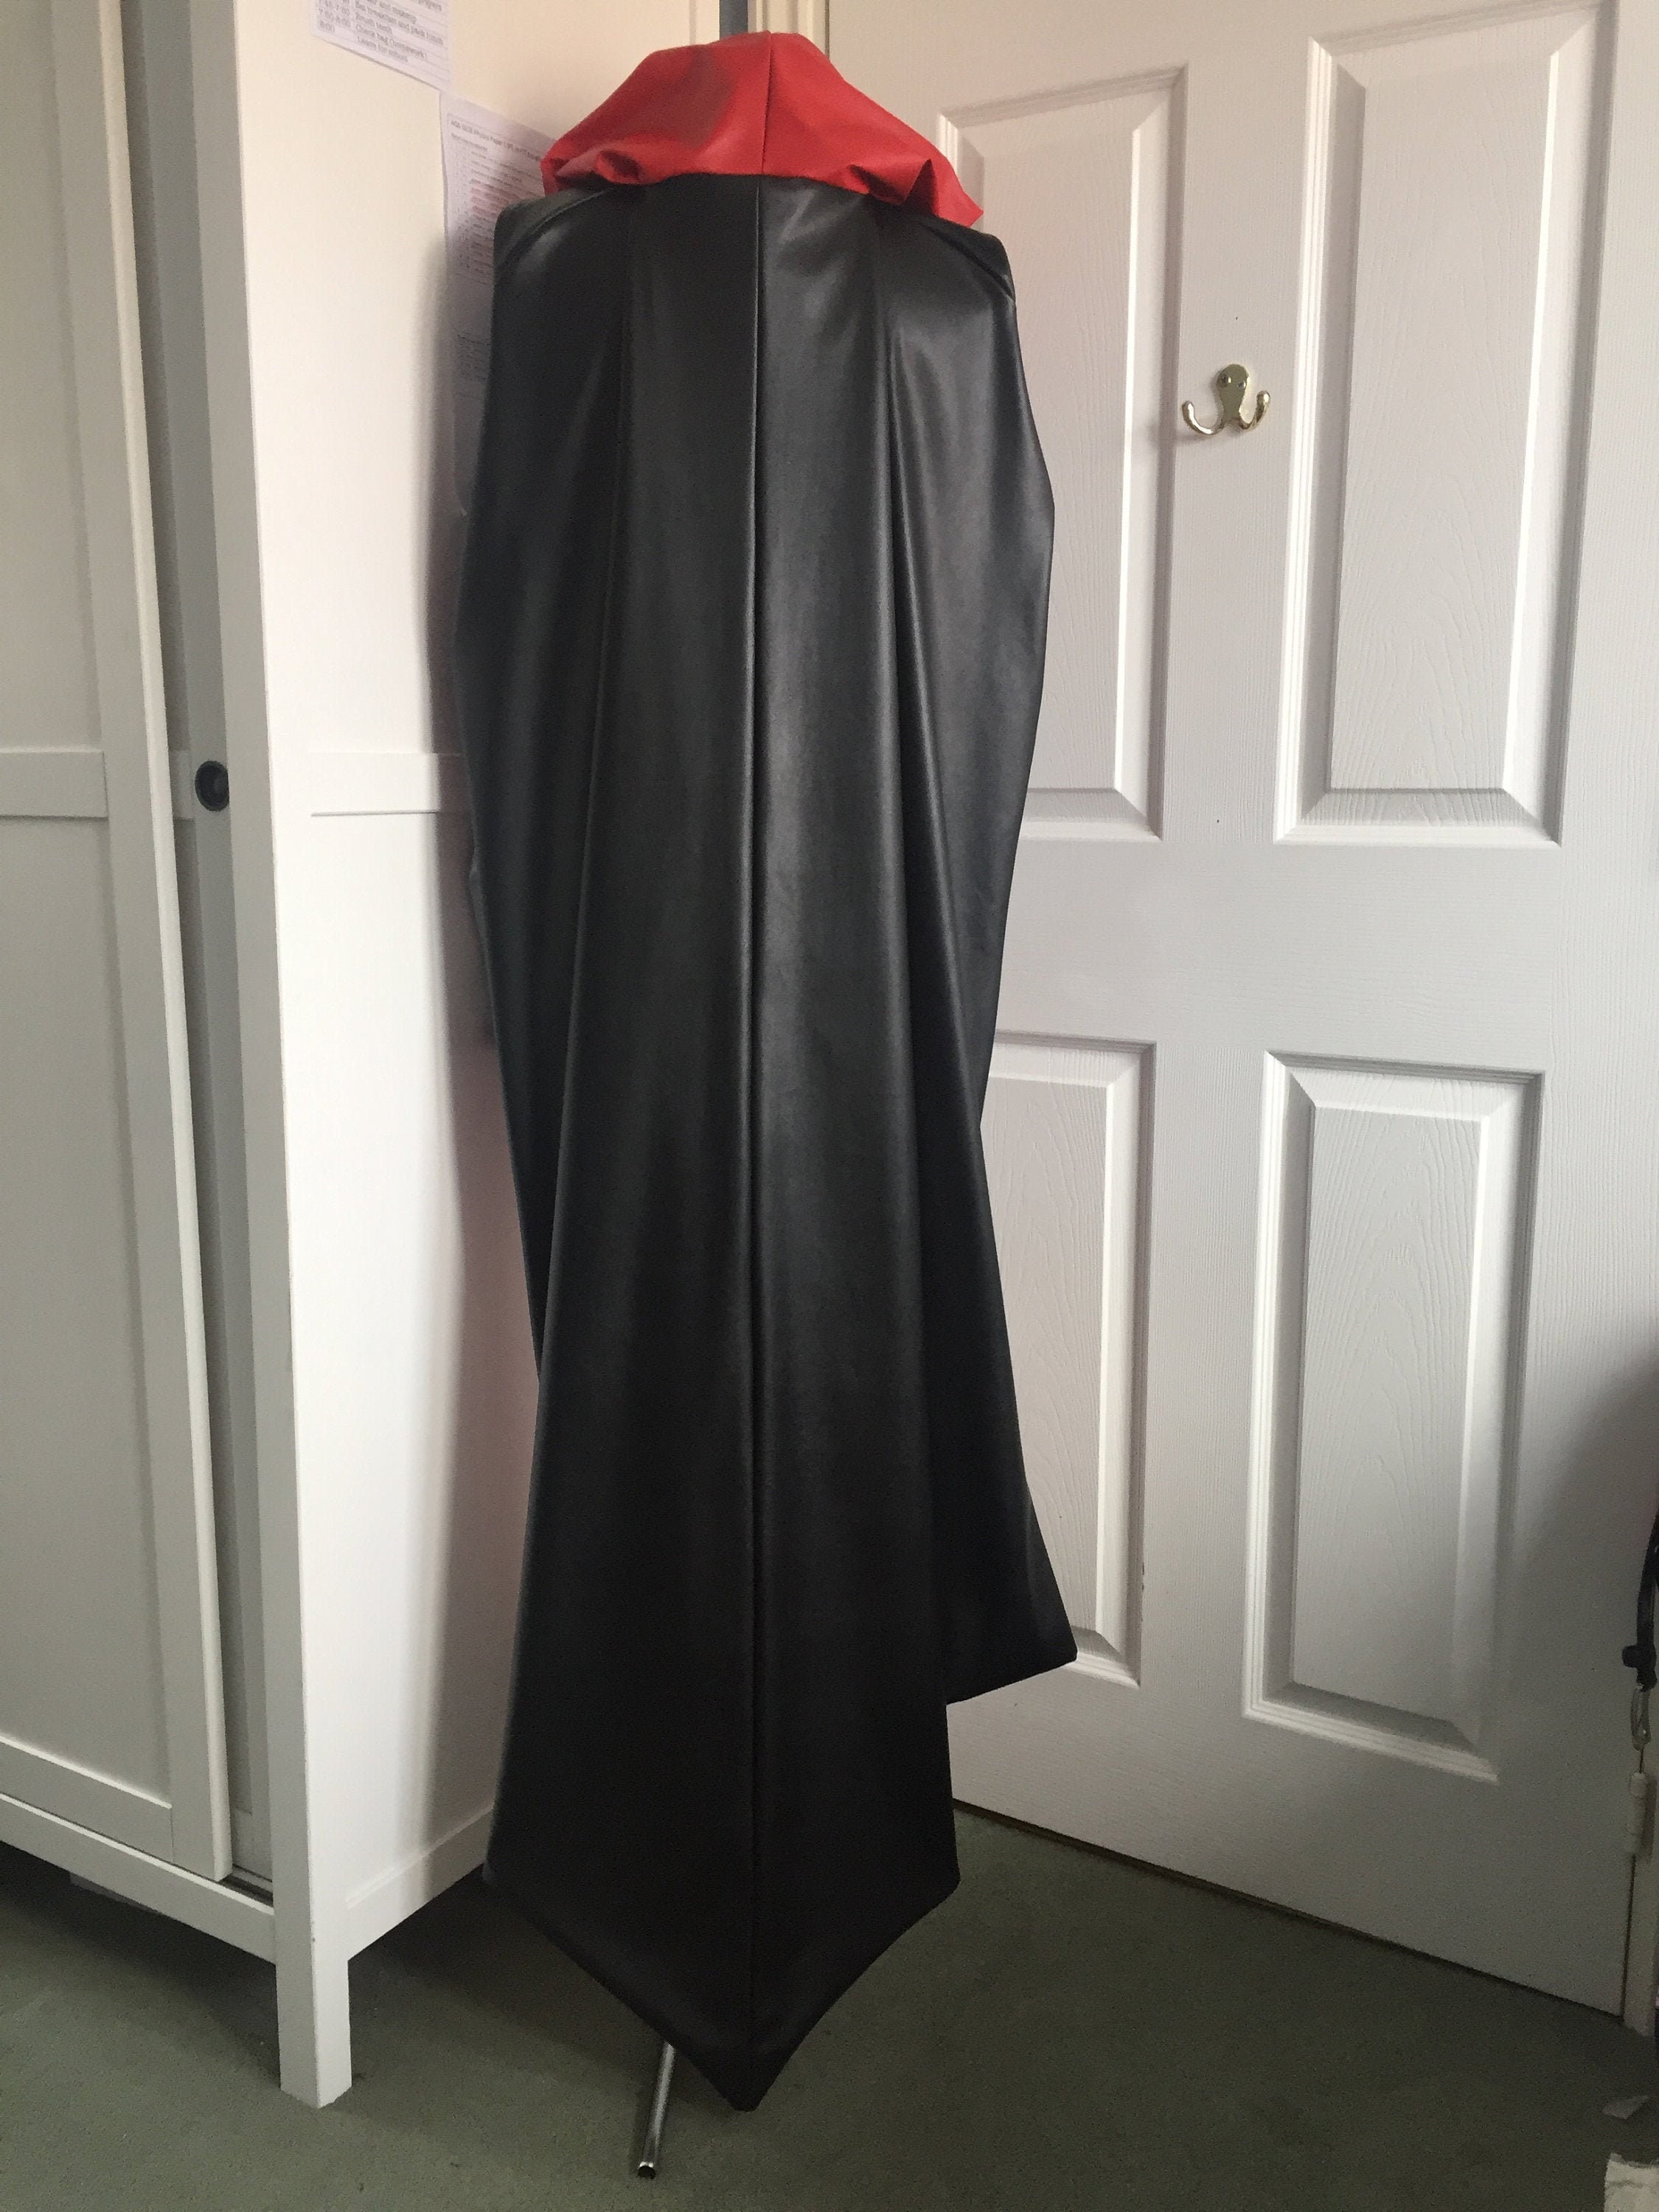 Cosplay cape cloak with or without hood pleather or pvc fully | Etsy